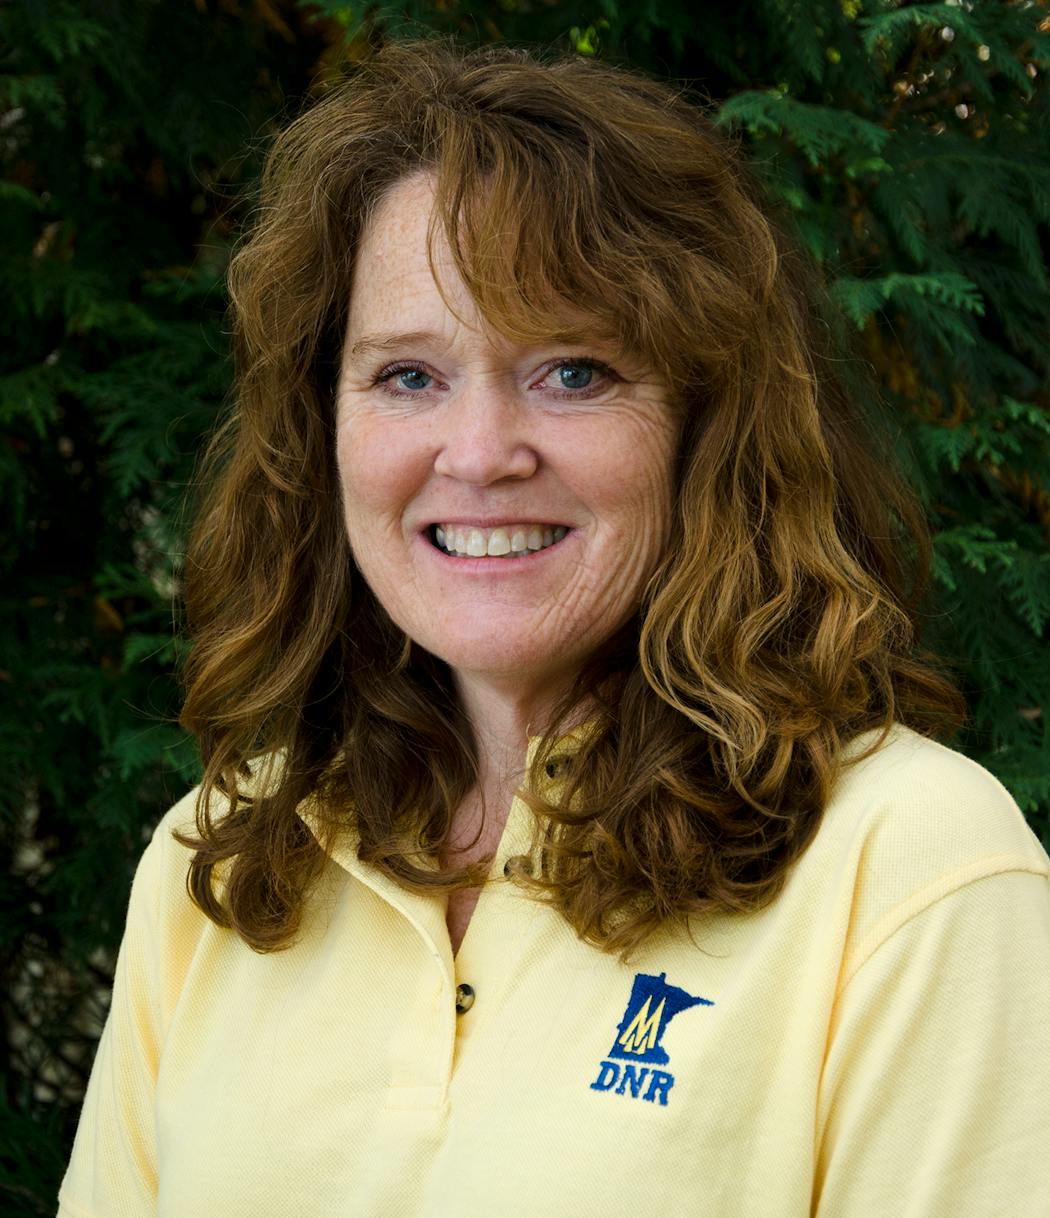 Ann Pierce is the director of the Department of Natural Resources Parks and Trails Division.